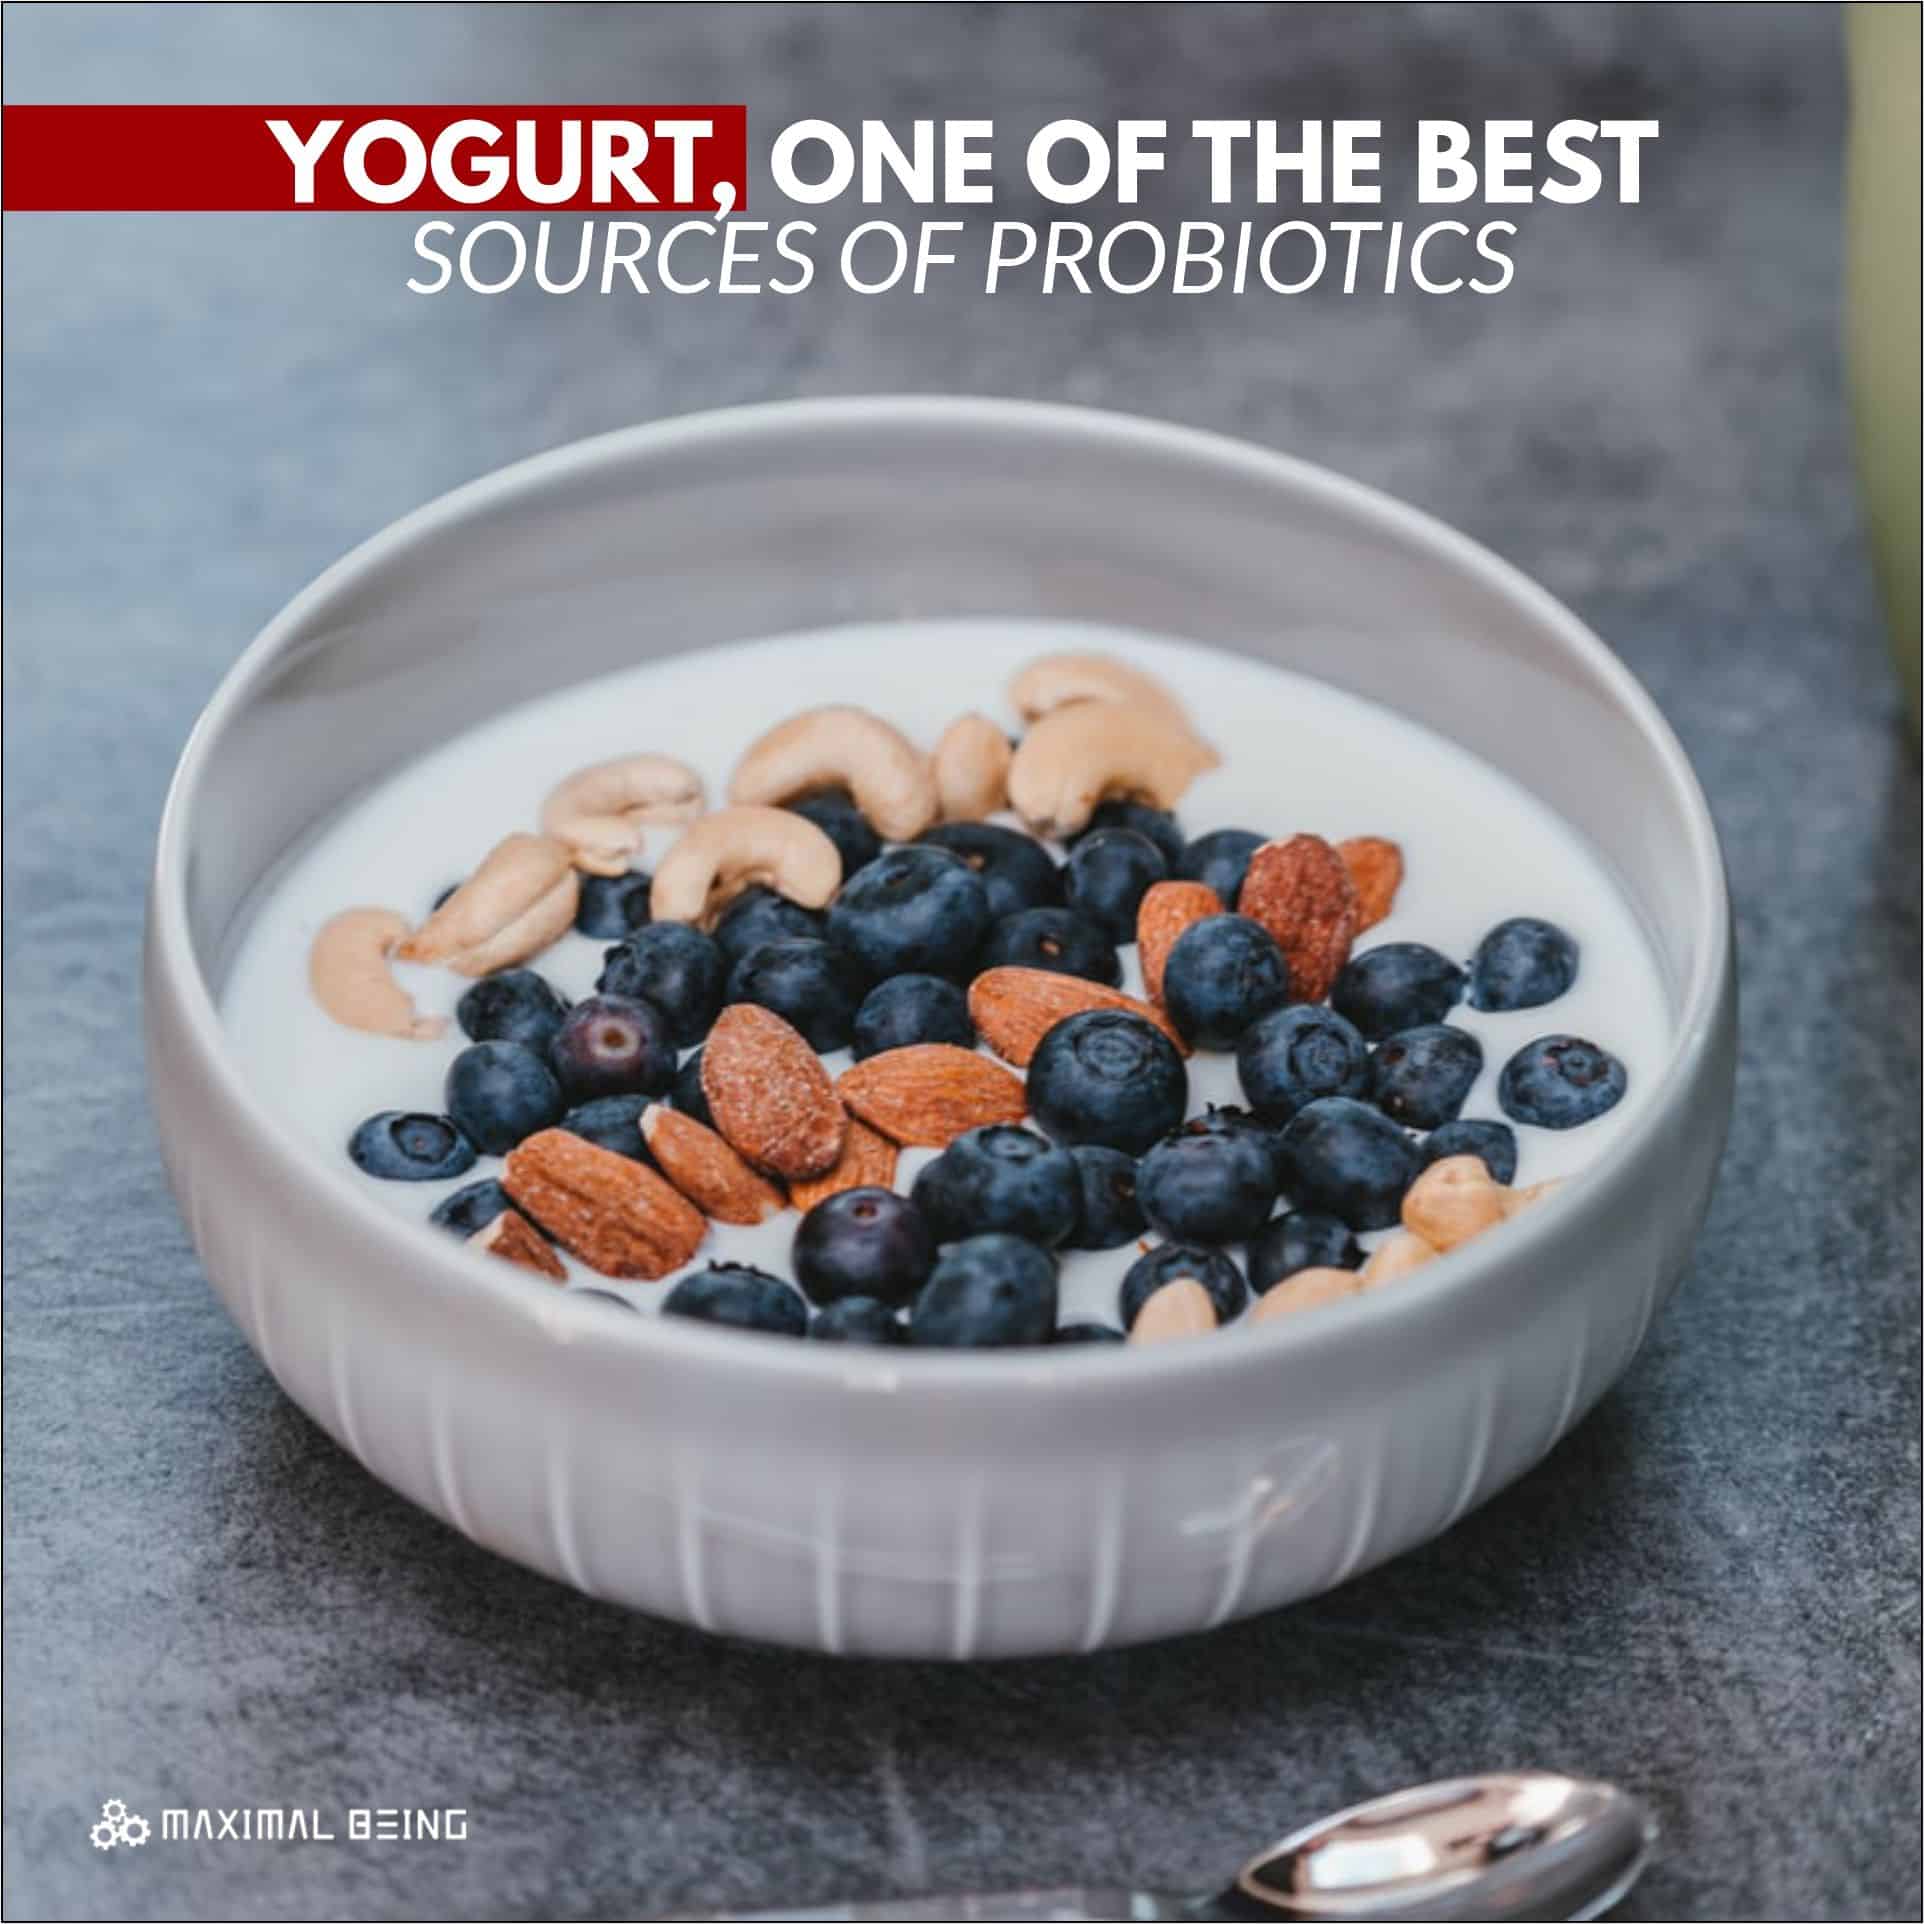 Yogurt is one of the best sources of probiotics, which are friendly ...